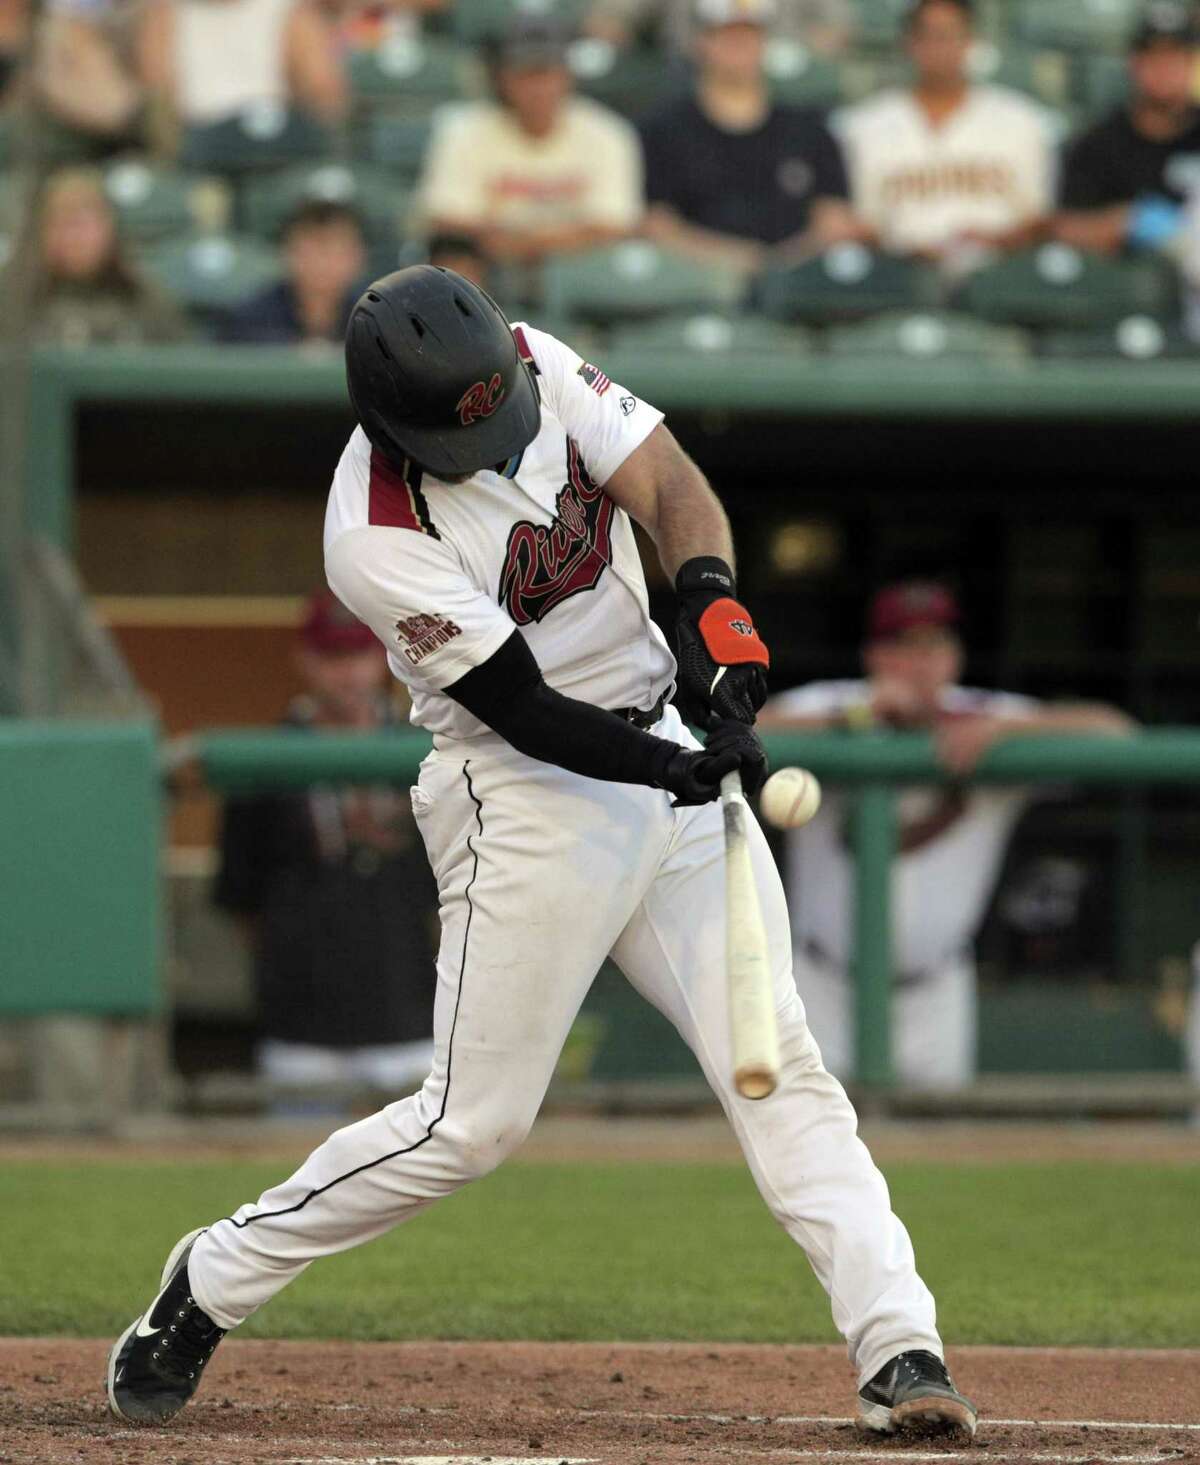 Giants catcher Joey Bart hits a single during a game between the Sacramento River Cats and the El Paso Chihuahuas at Sutter Health Park in Sacramento, Calif., on Thursday, June 23, 2022. Bart was sent back to Triple-A Sacramento working on his batting and getting guidance on his swing.